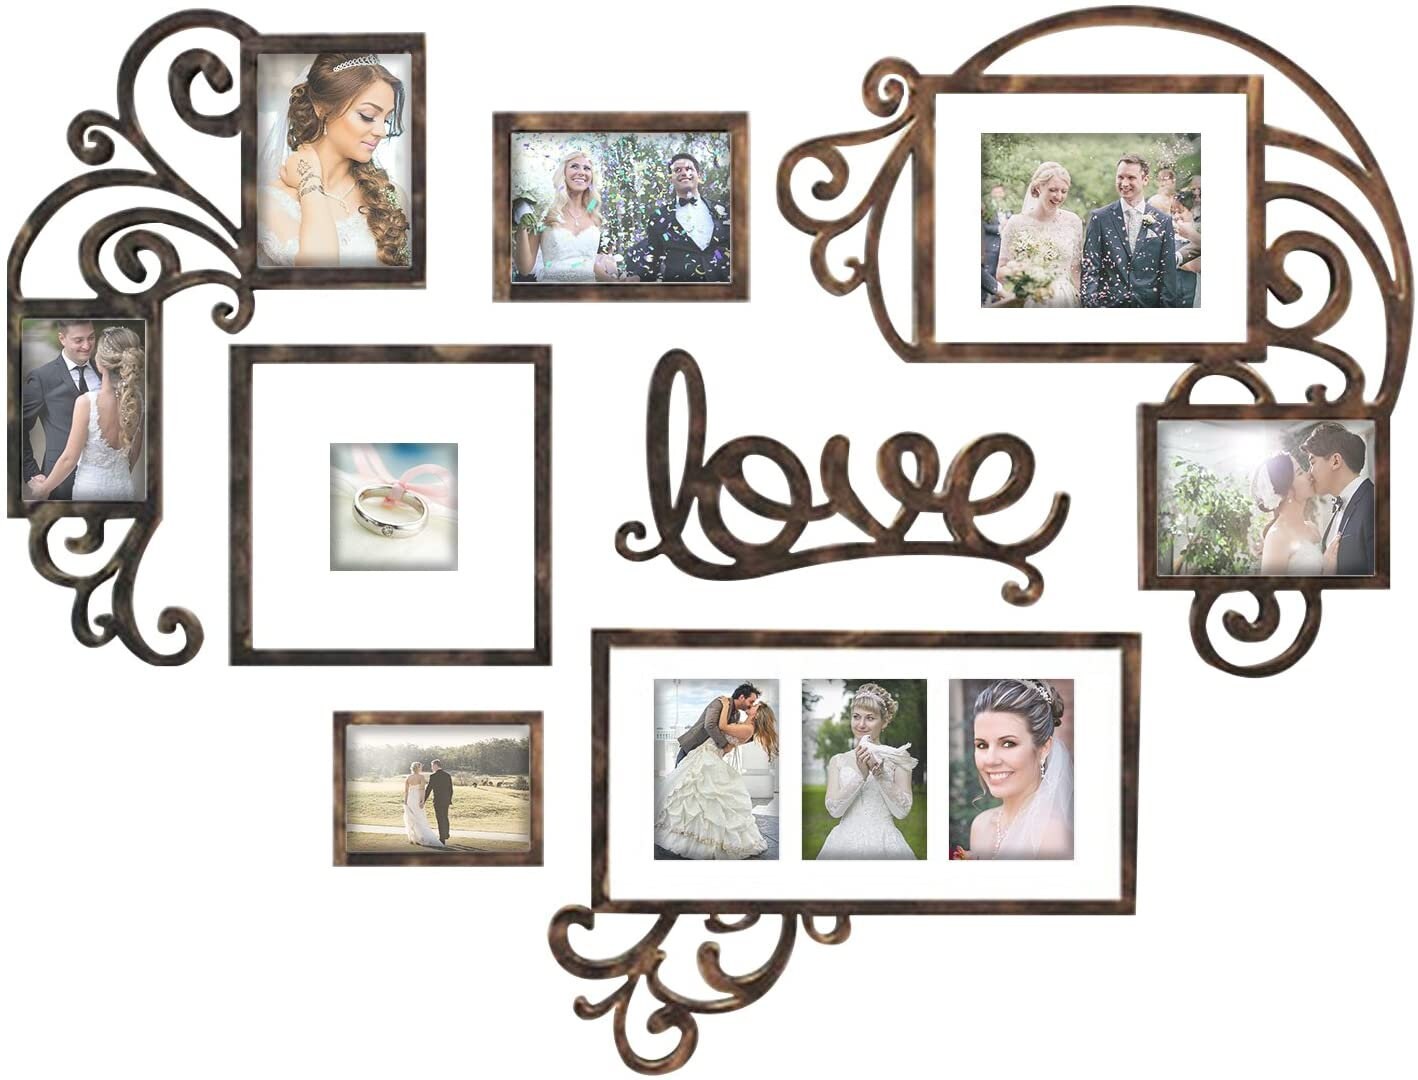 Wood Picture Photo Frames Hanging Photo Display Collage Large